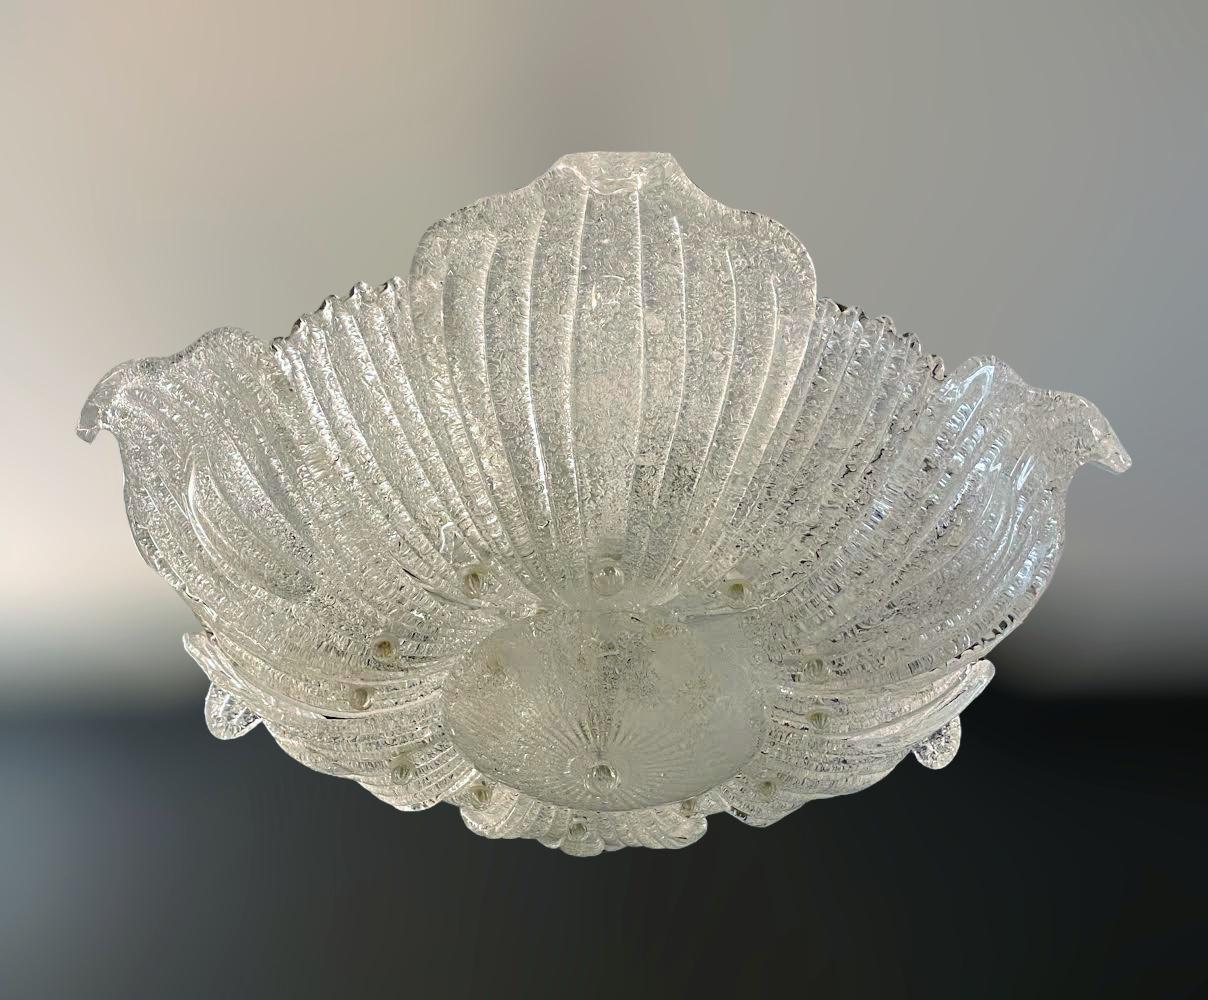 Vintage Italian Murano glass flush mount with clear graniglia glass leaves on white metal frame / Made in Italy in the style of Barovier e Toso, circa 1960s
4 lights / E26 or E27 type / max 60W each
Measures: Diameter 29 inches, height 8 inches
1